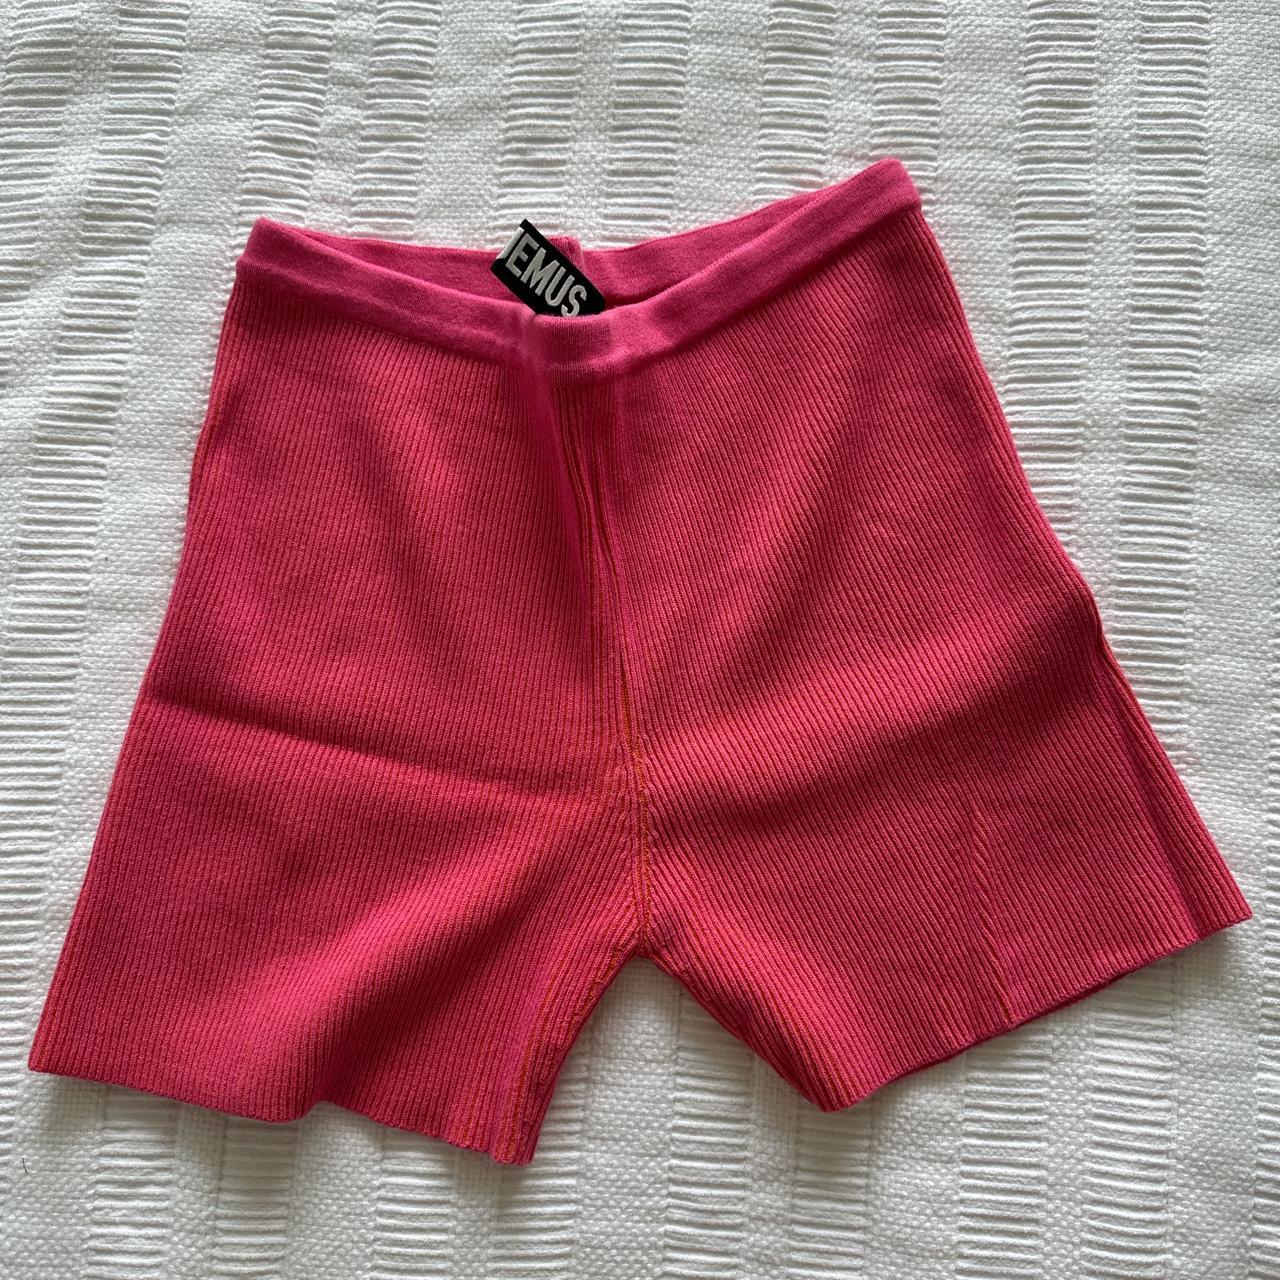 Jacquemus pink shorts. Purchased in 2020 but never... - Depop